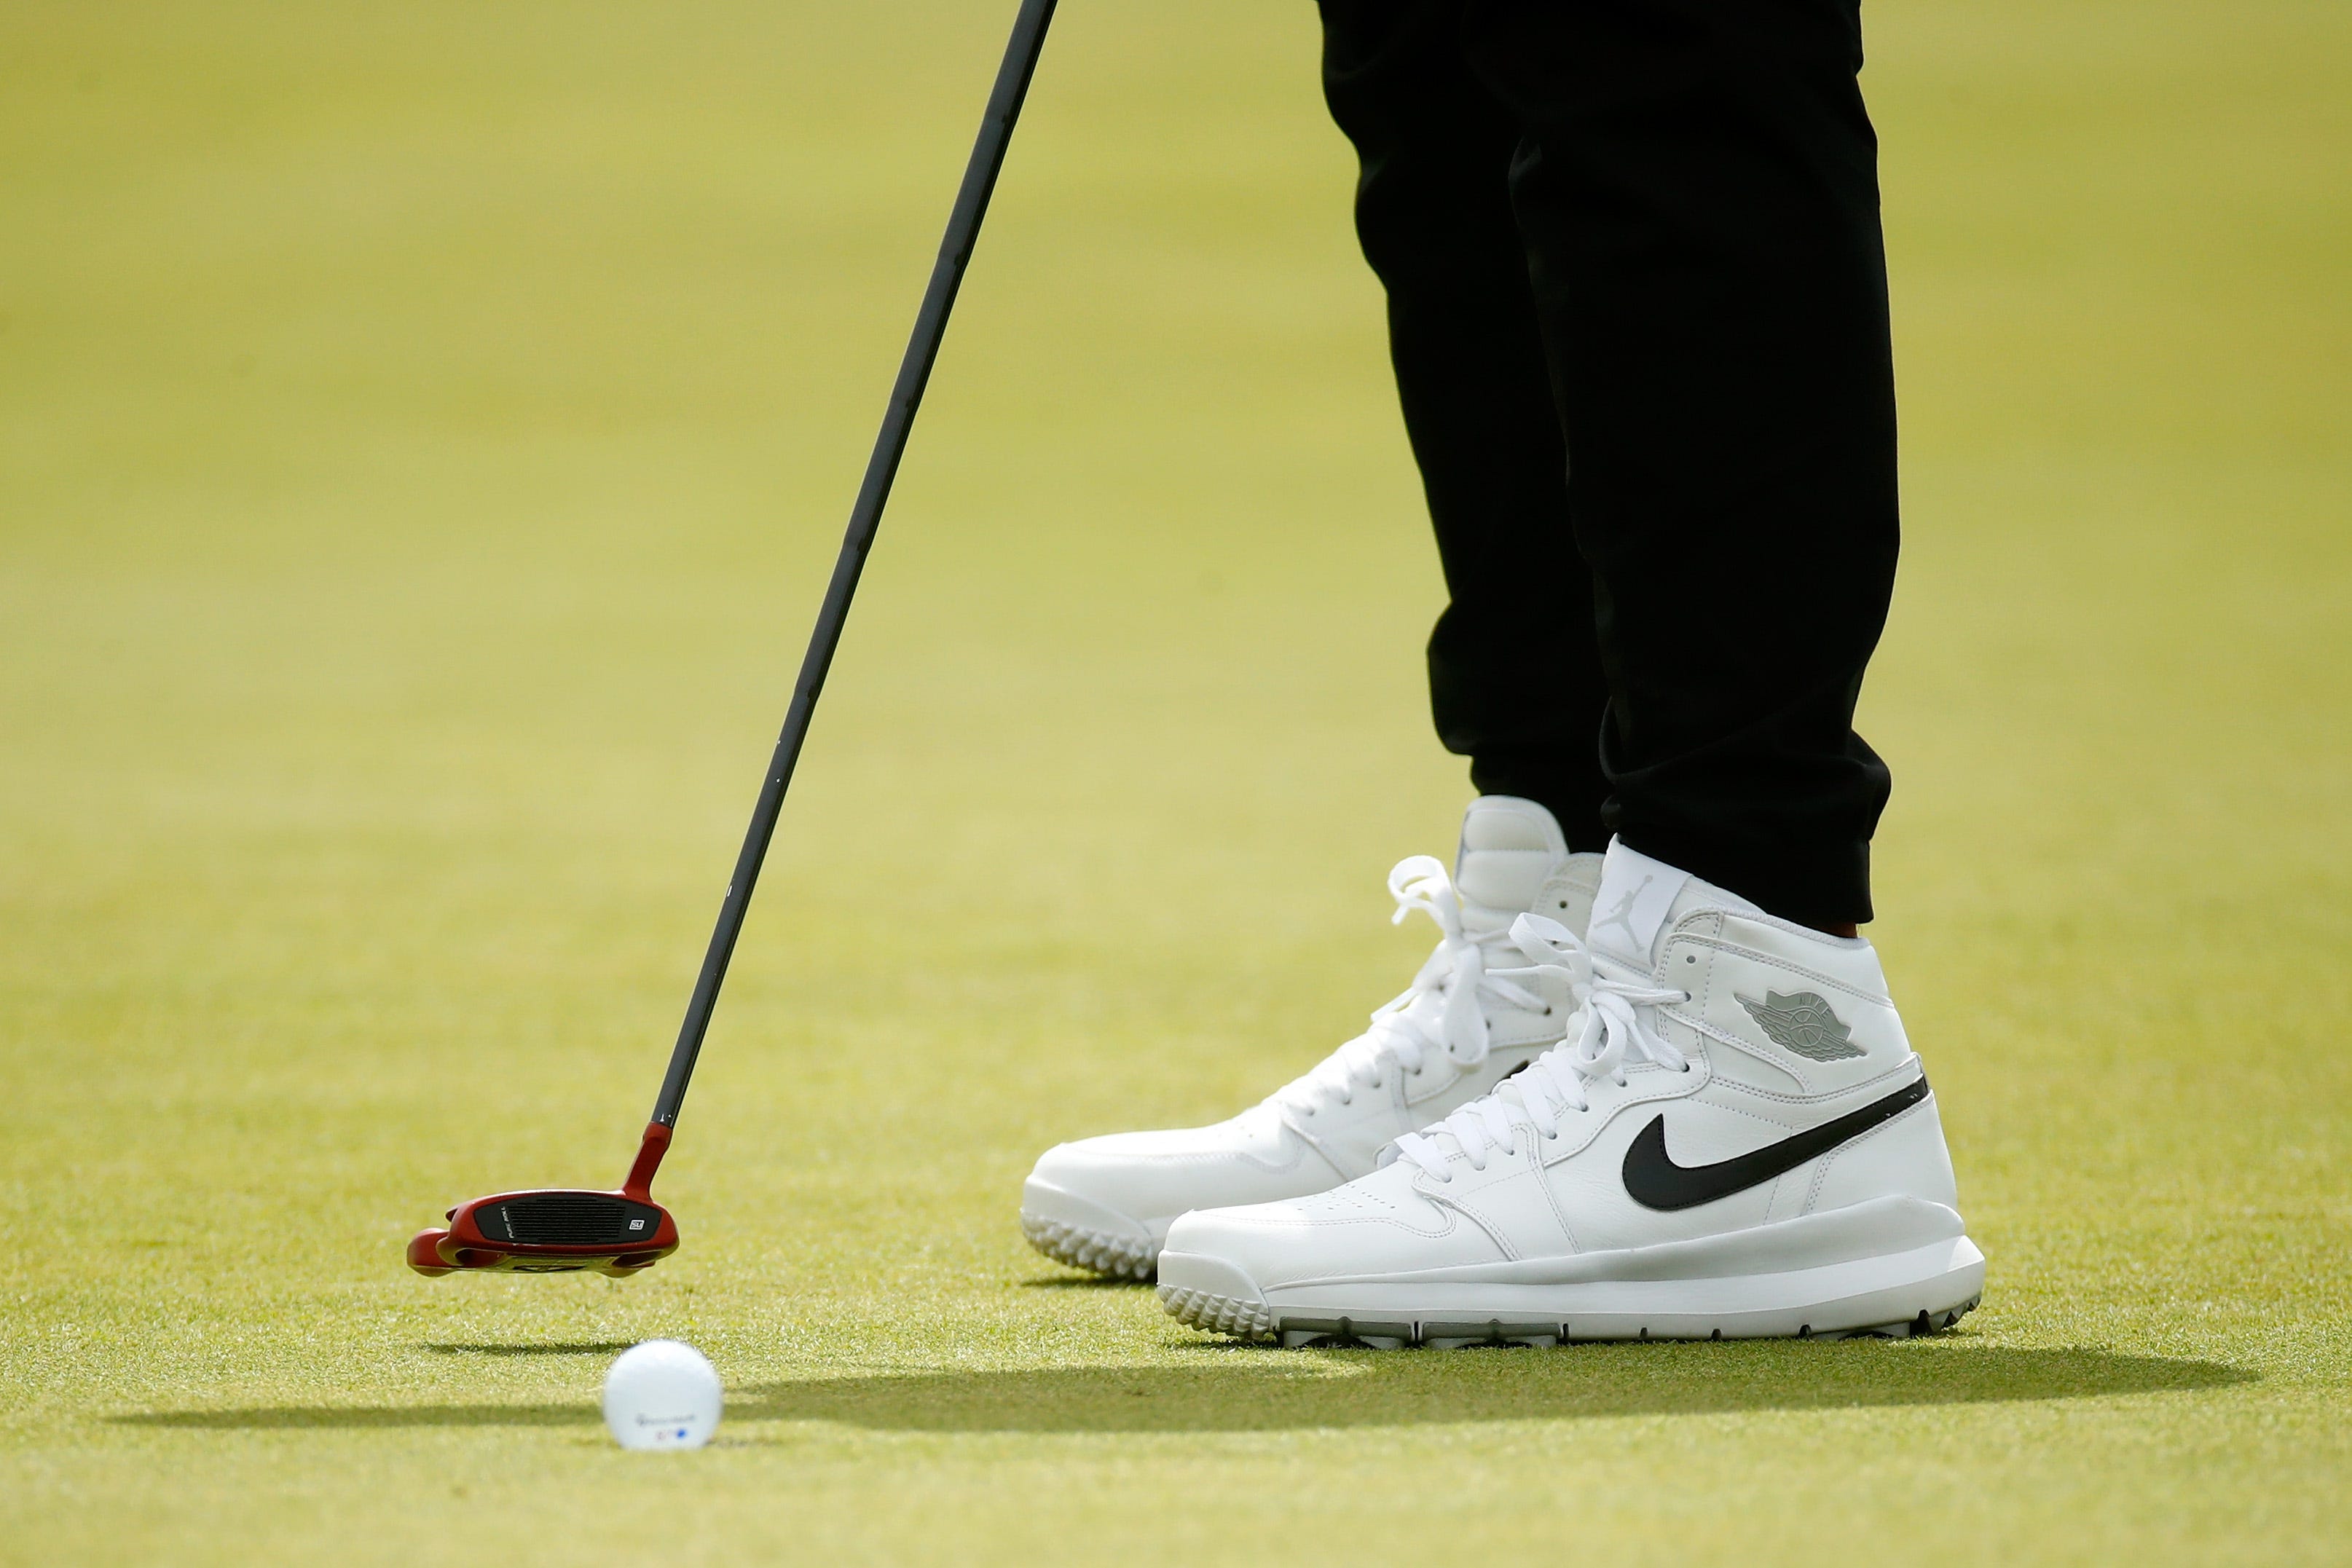 Golf fans roast Jason Day for his Open shoe choice